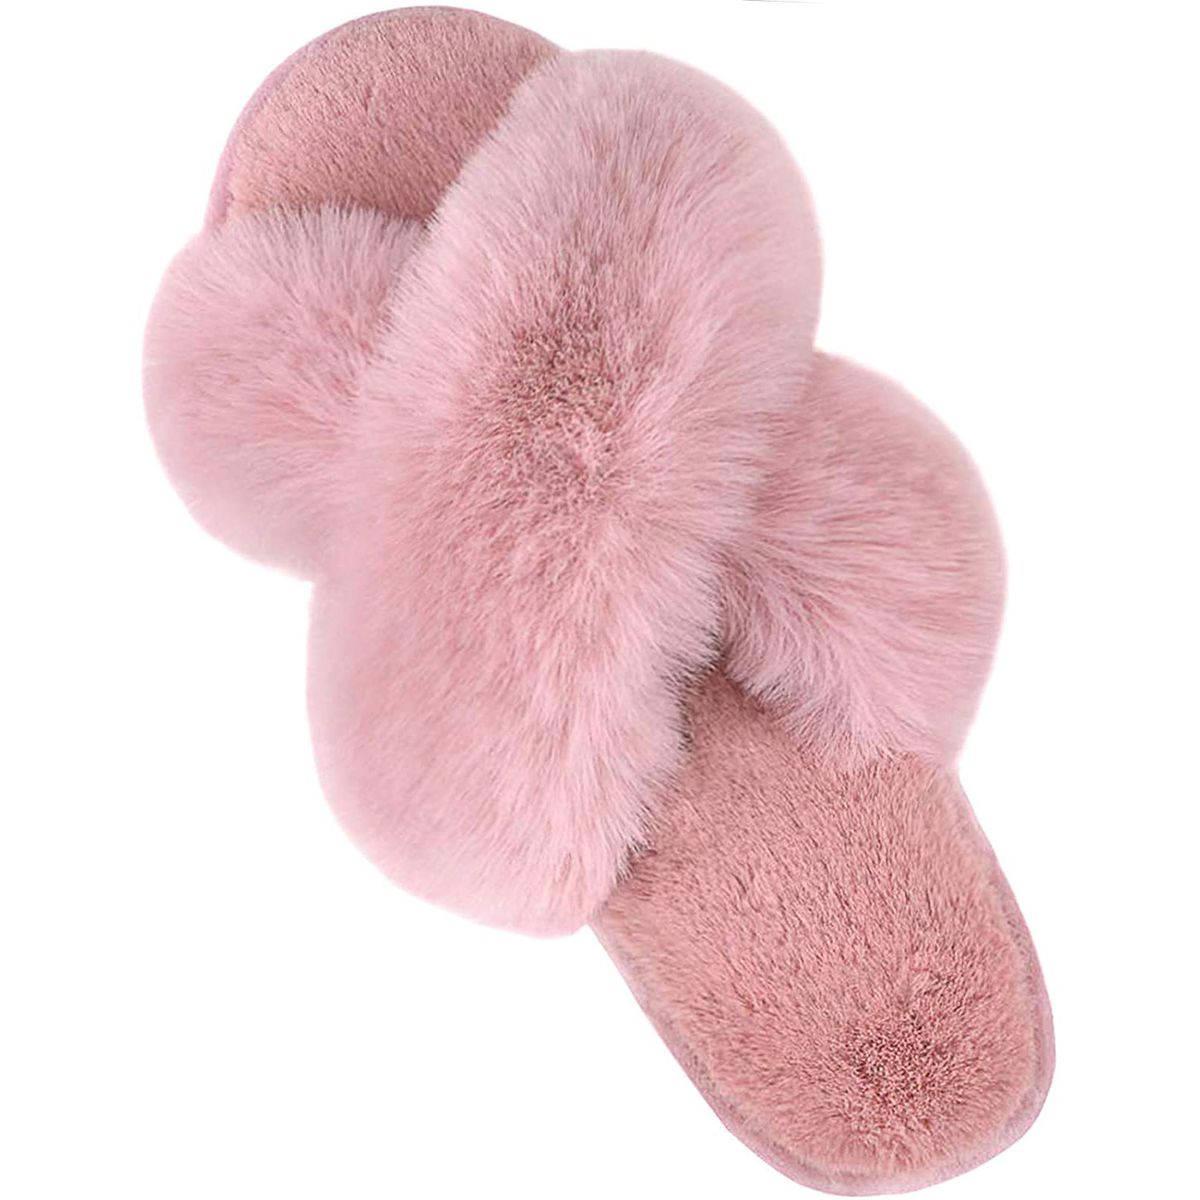 Parlovable slippers